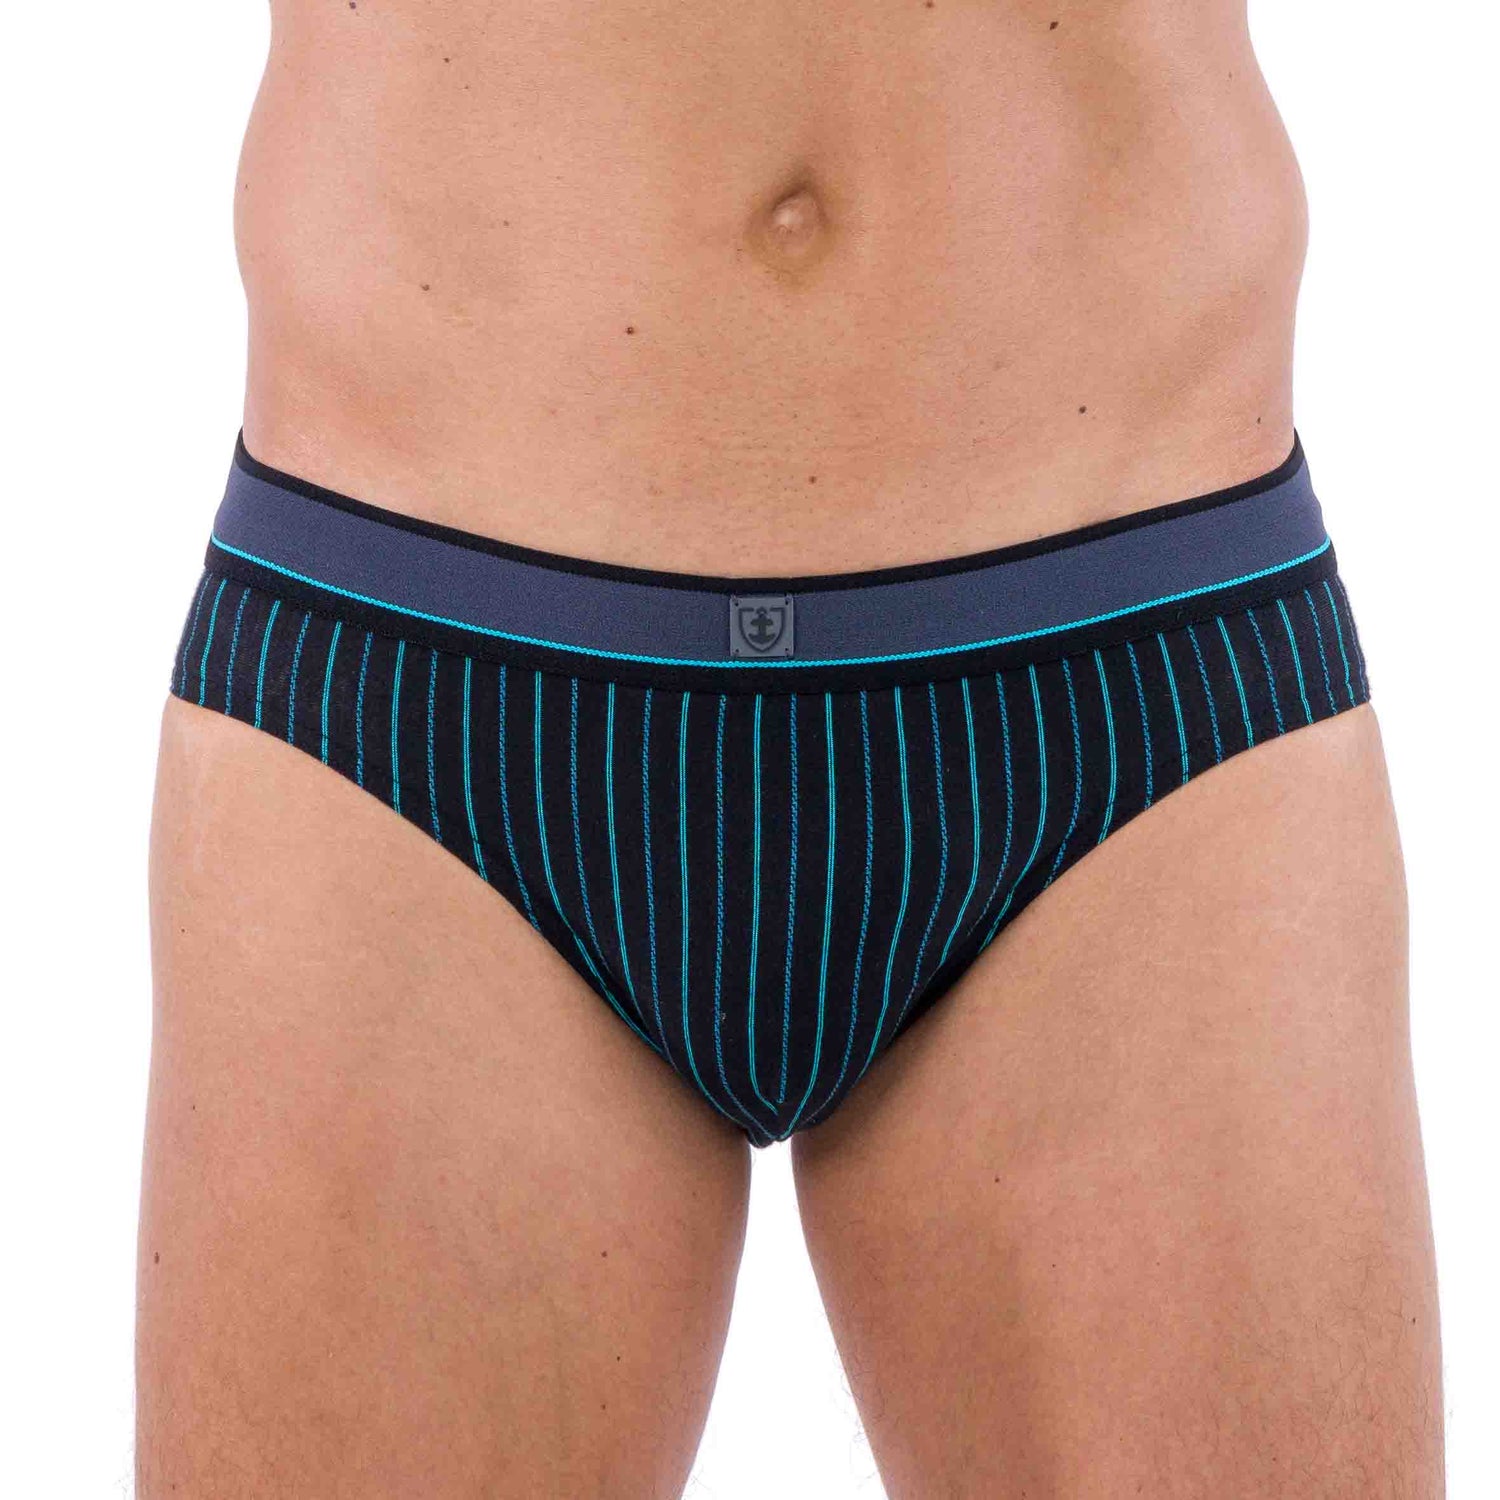 Low-waisted briefs with belt in Navy Blue Striped Microfiber